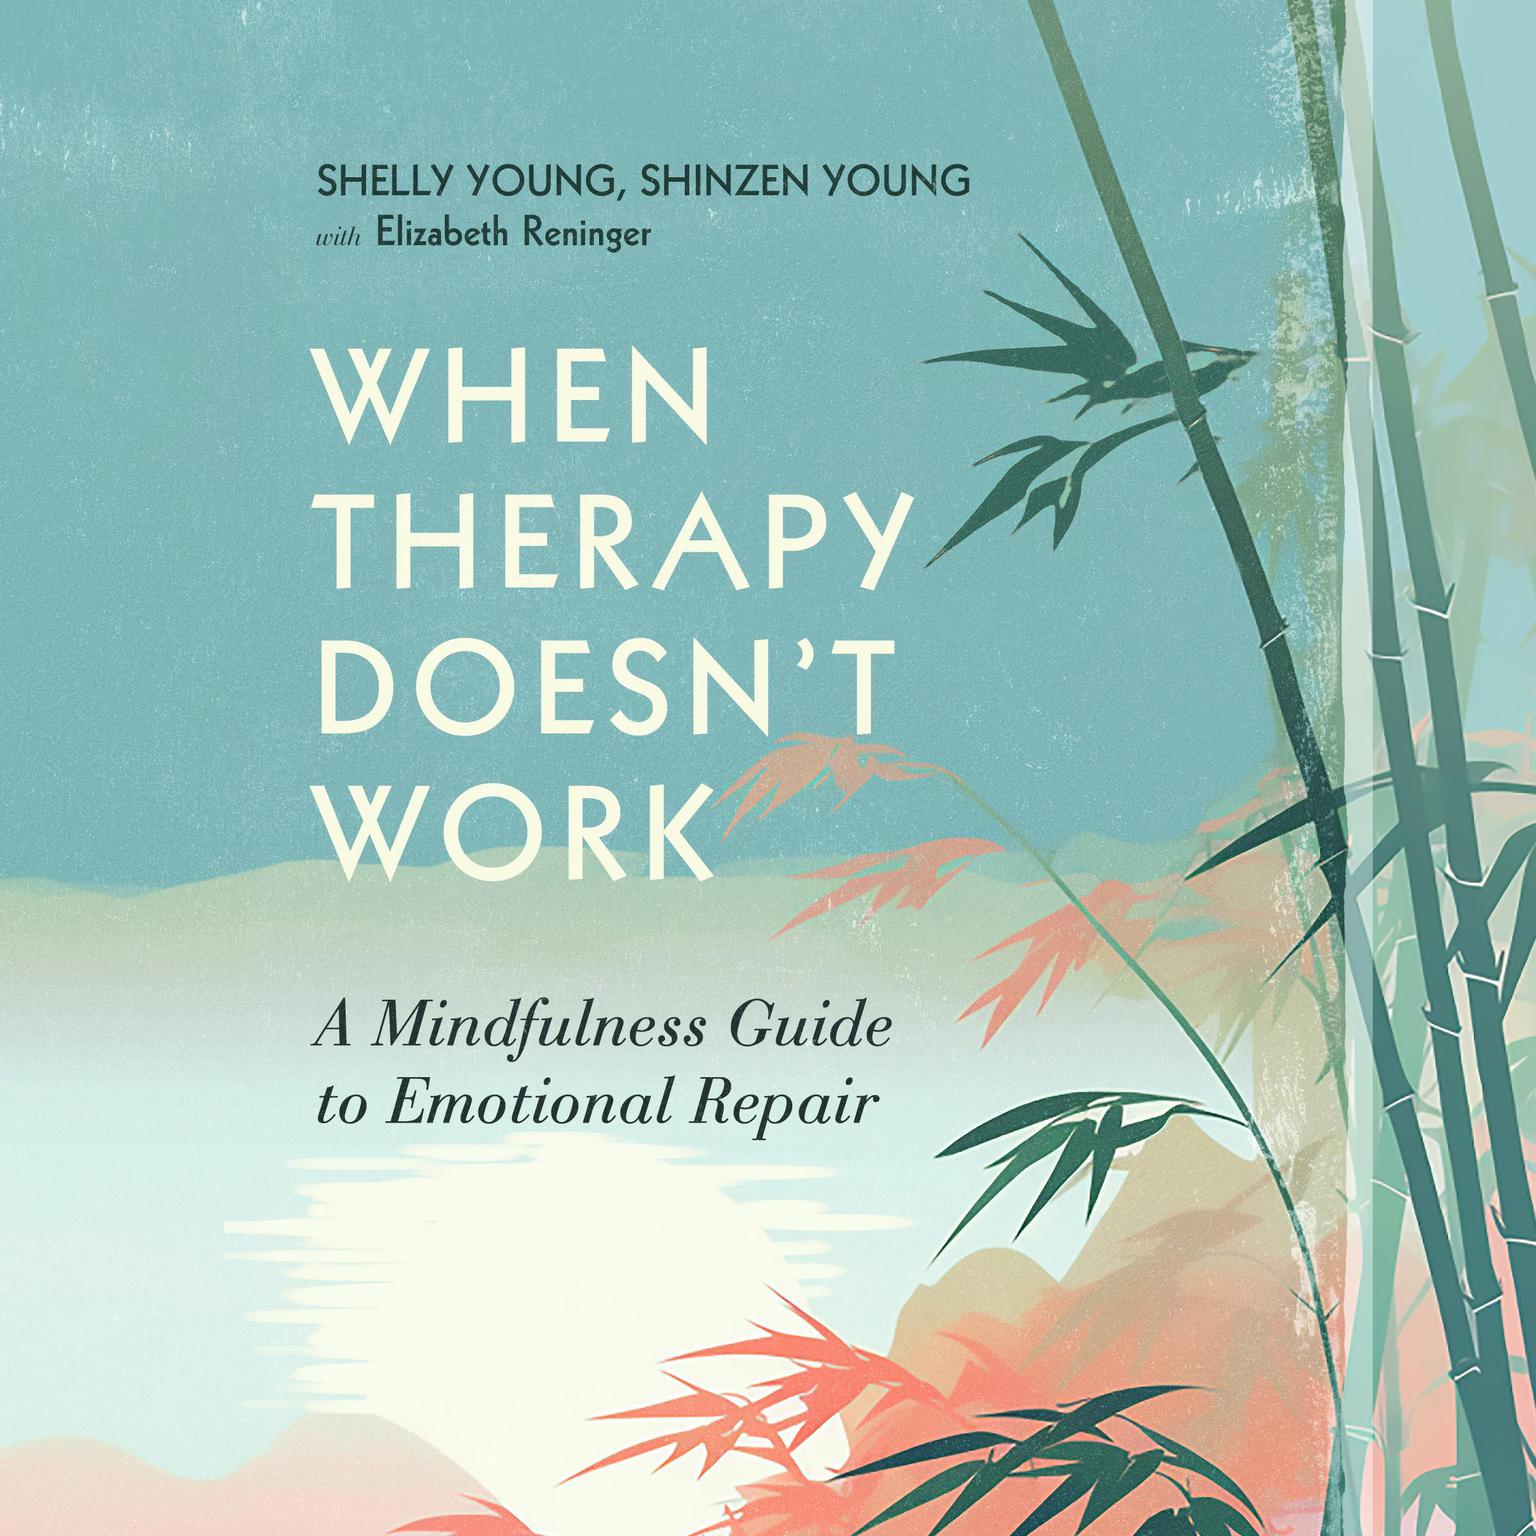 When Therapy Doesnt Work: A Mindfulness Guide to Emotional Repair Audiobook, by Elizabeth Reninger